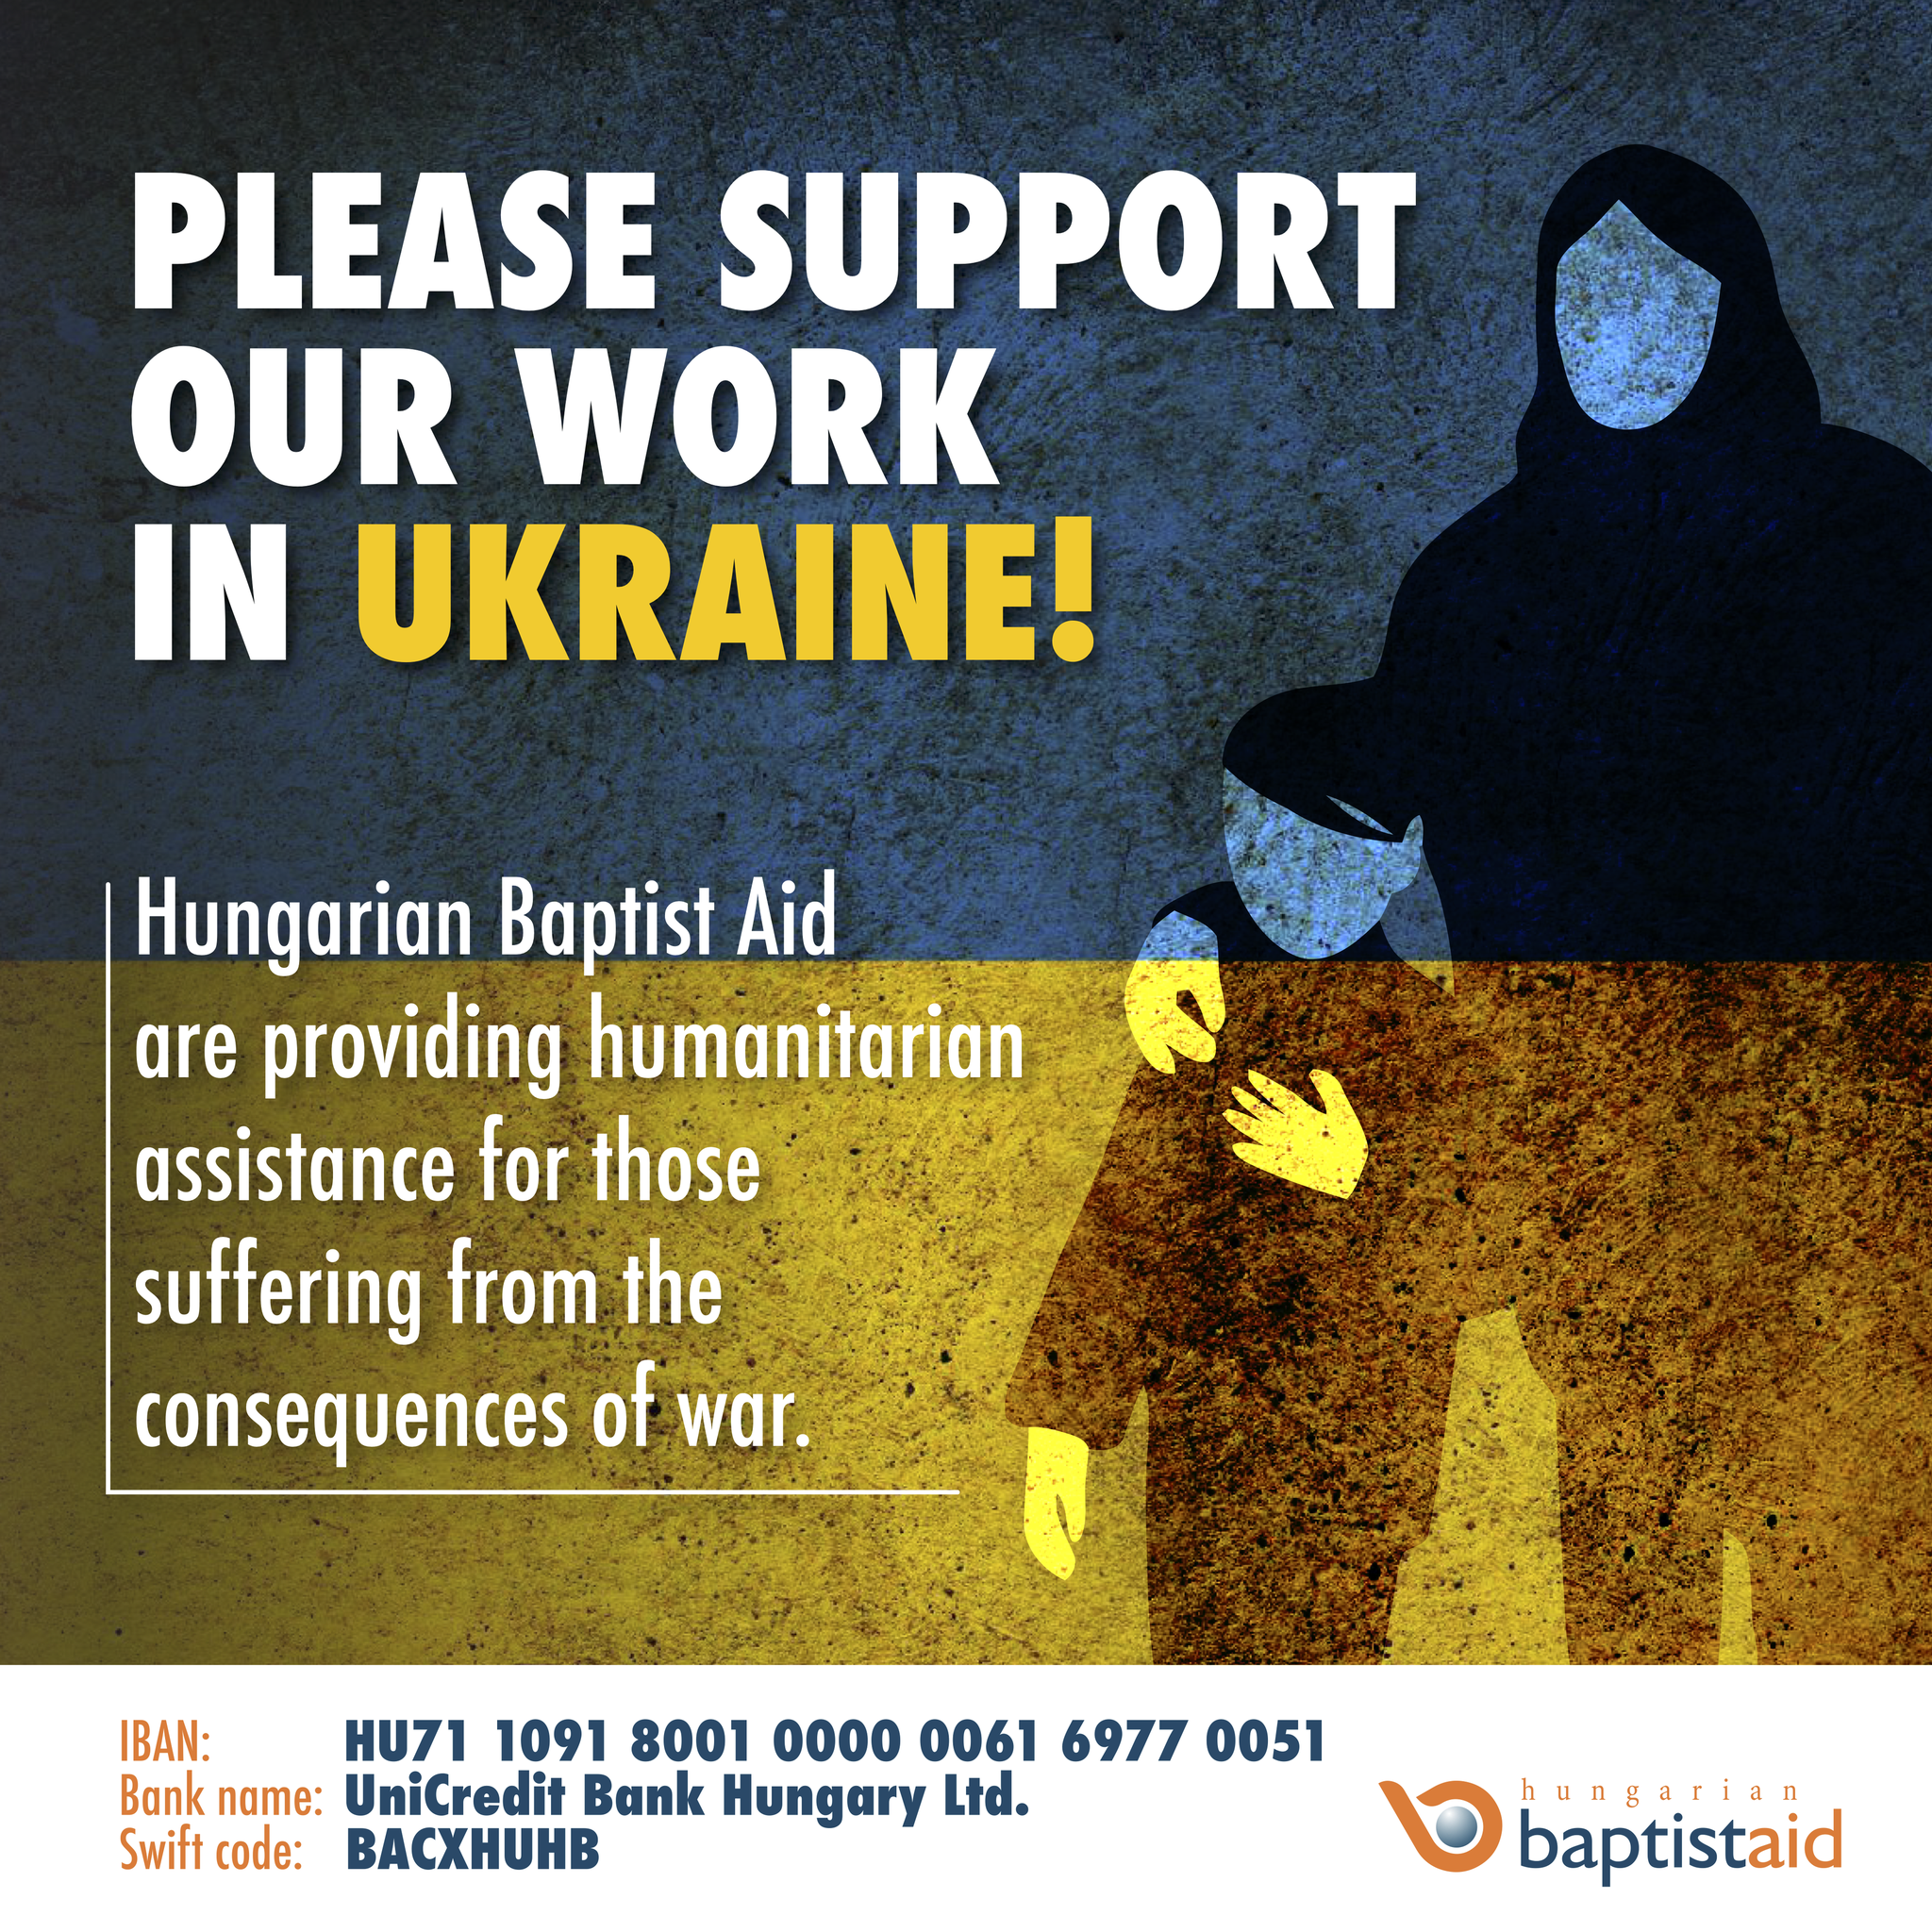 Urgent Help Needed for Hungarian Baptist Aid to Help Ukrainian Refugees